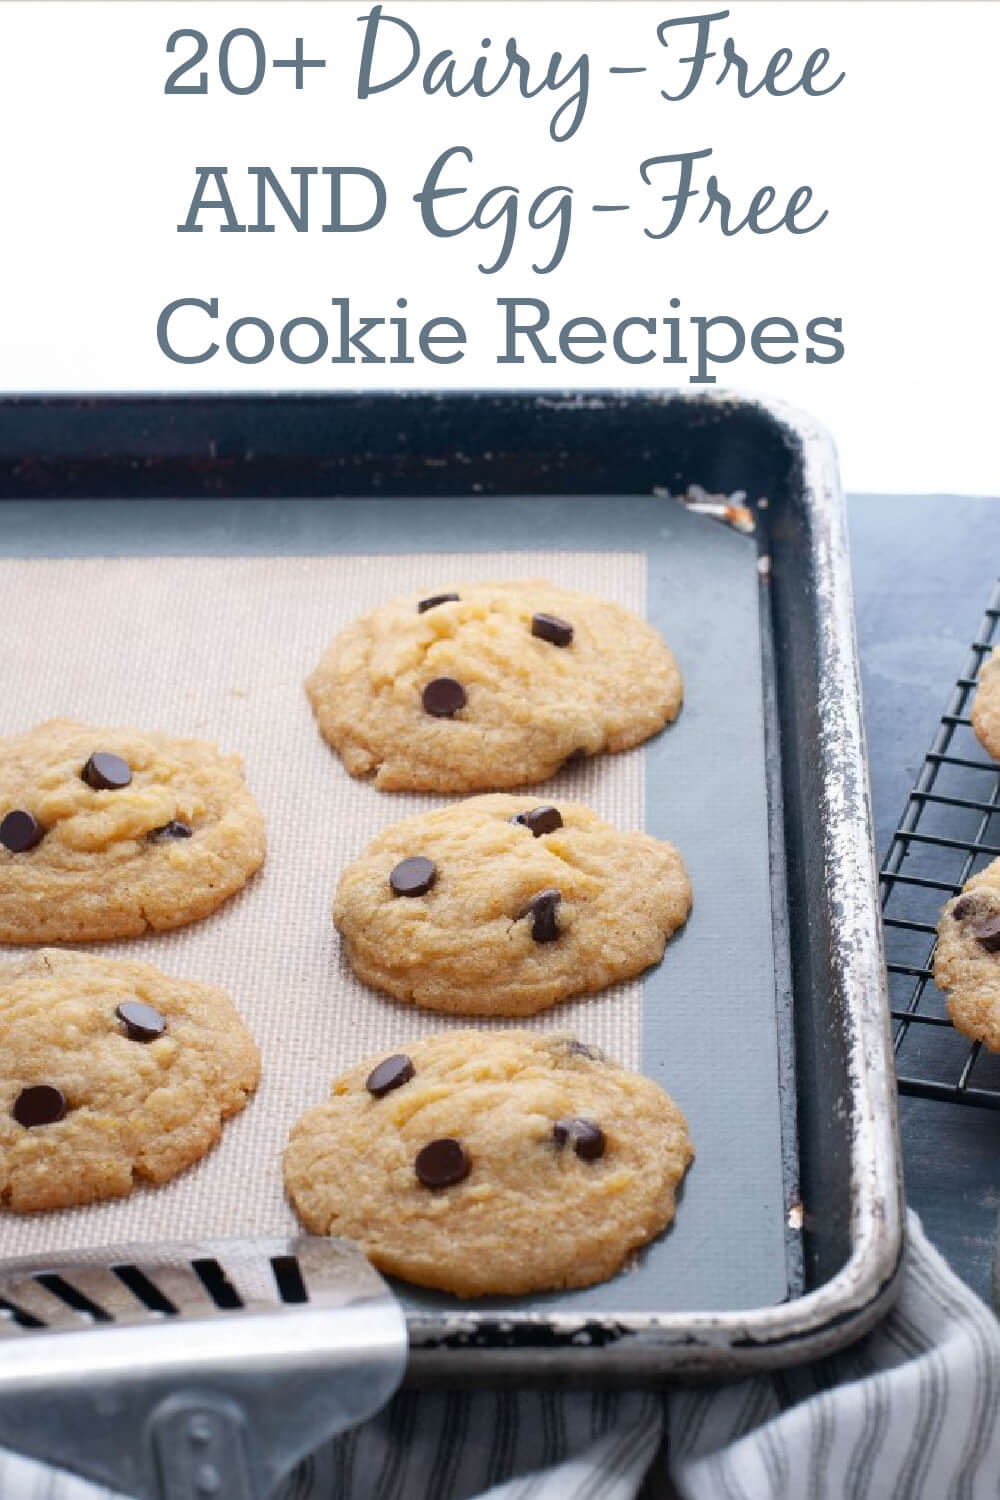 https://allergyawesomeness.com/wp-content/uploads/2023/03/dairy-free-egg-free-cookie-recipes.jpg